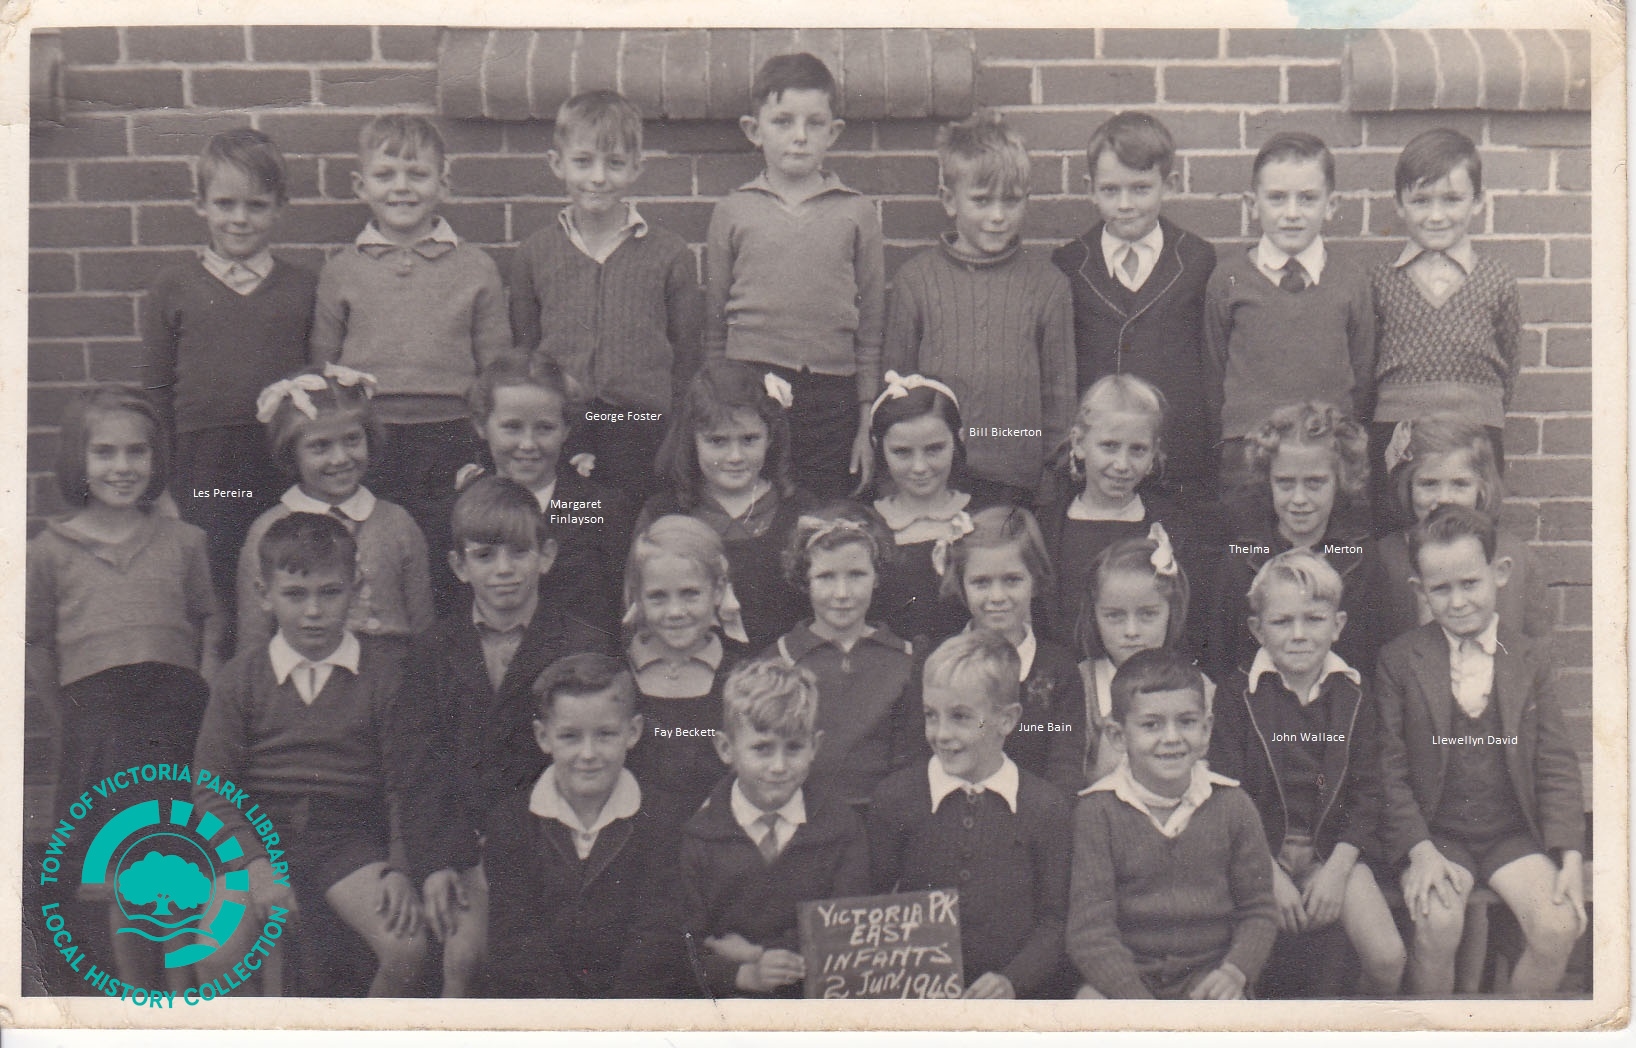 PH00032-01 East Victoria Park Primary School Infants Class 2 June 1946 Donated by Llewellyn David Image